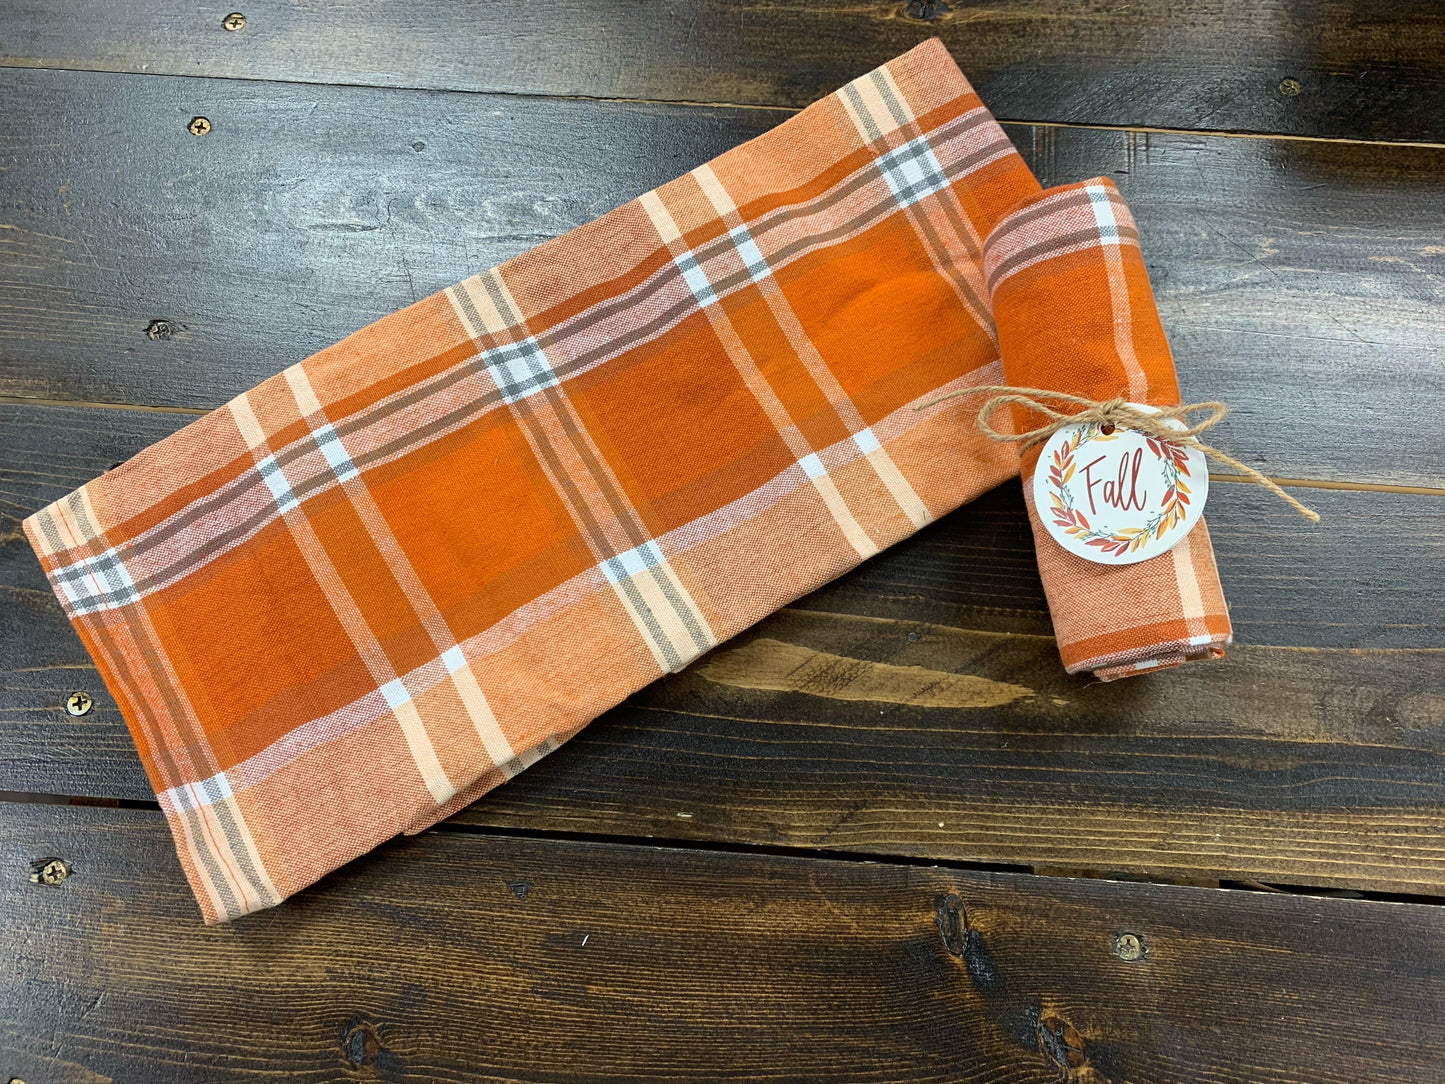 Autumn Afternoon Dish Towels